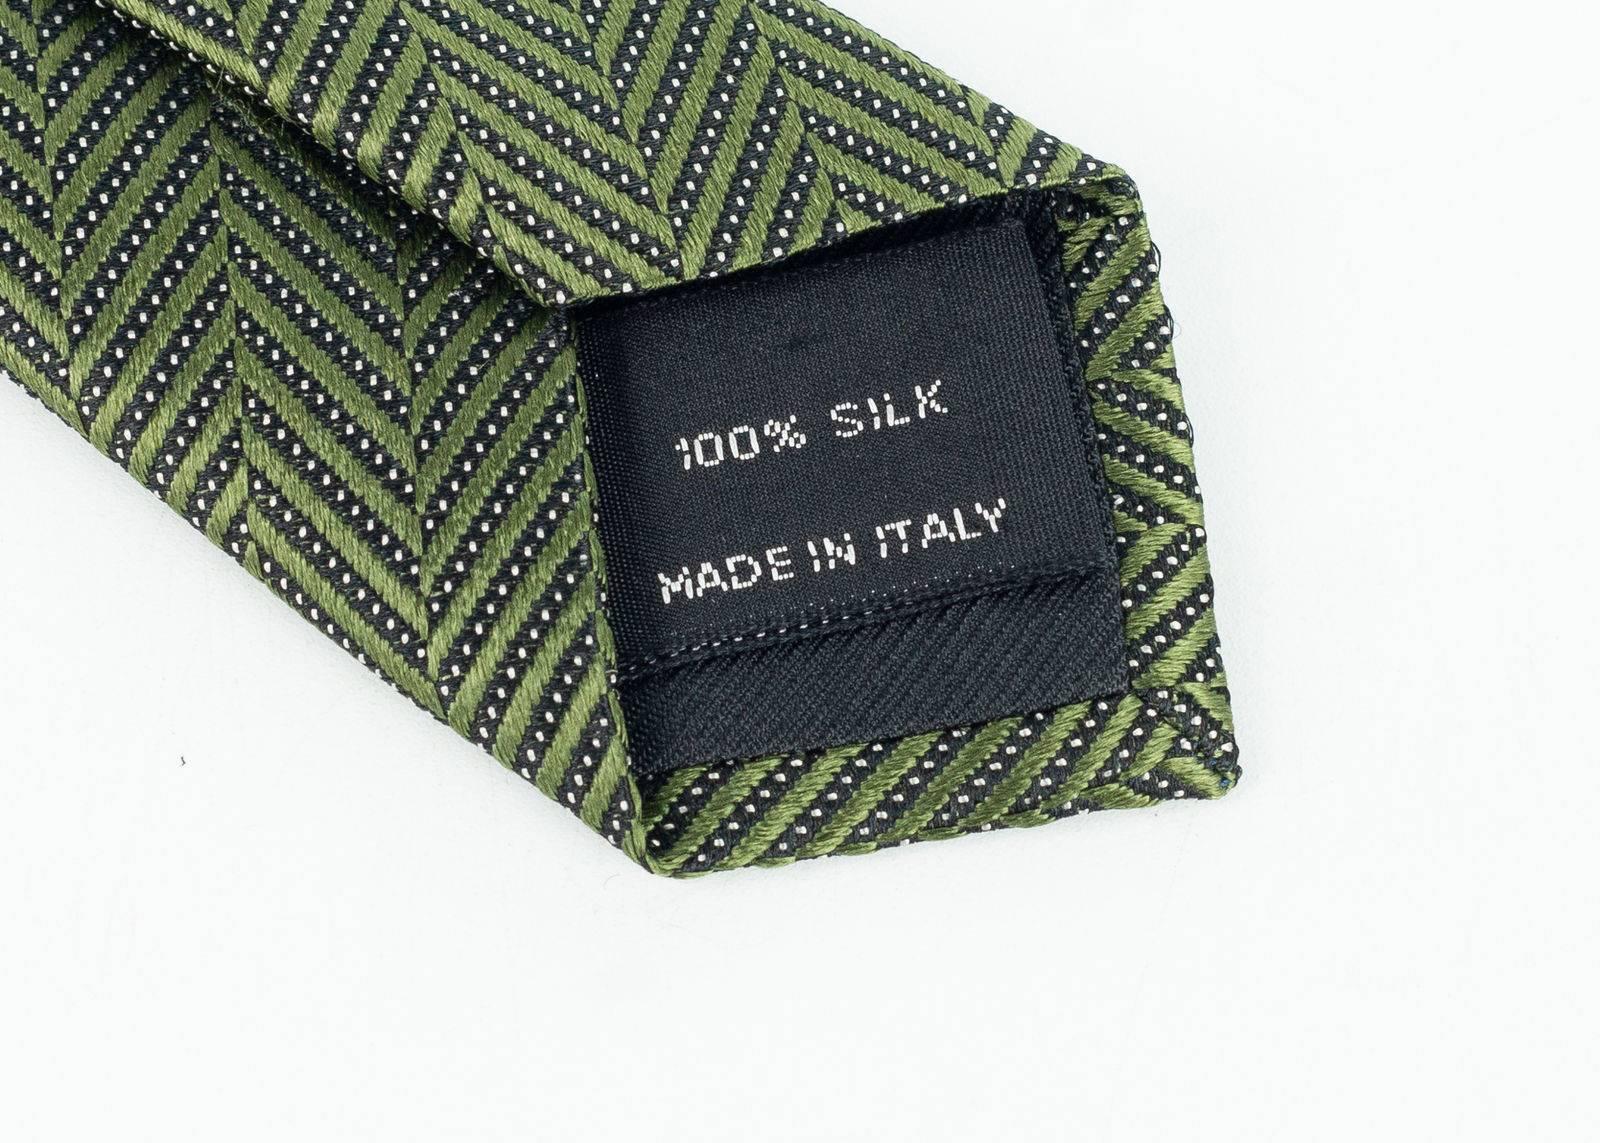 Gray Italian luxury brand, Tom Ford, has crafted these gorgeous Knit and Silk Tie  For Sale